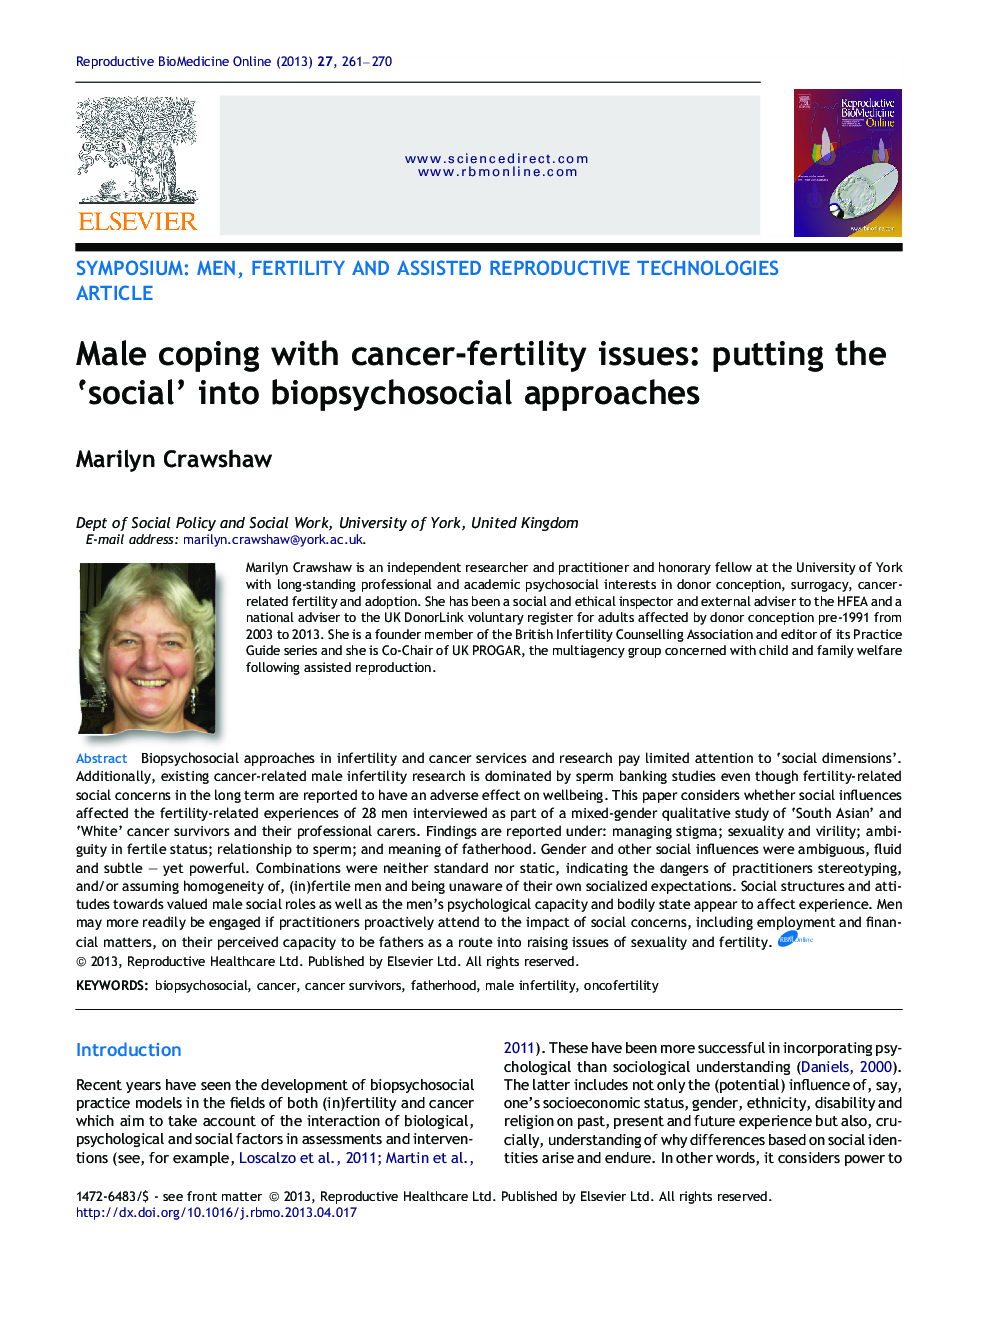 Male coping with cancer-fertility issues: putting the ‘social’ into biopsychosocial approaches 